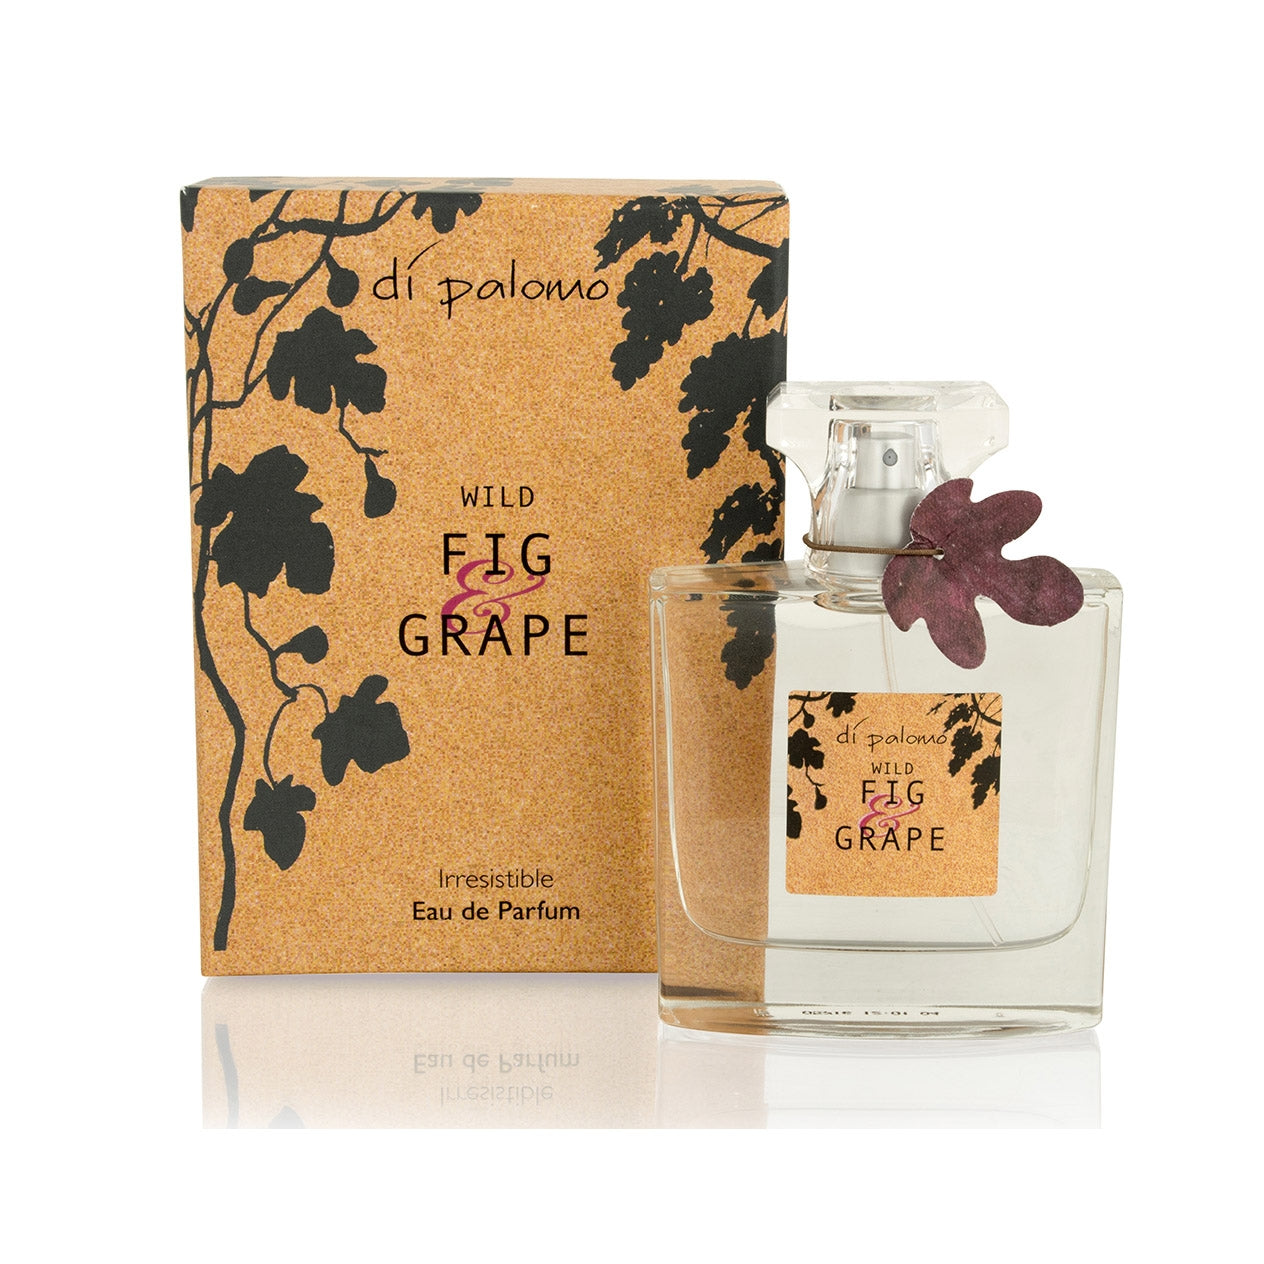 Simply irresistible! Fragrance yourself with our Wild Fig & Grape fragrance to last throughout the day to leave your skin and clothes smelling delicious. Expertly blended with the finest ingredients for that extra special Italian luxury!